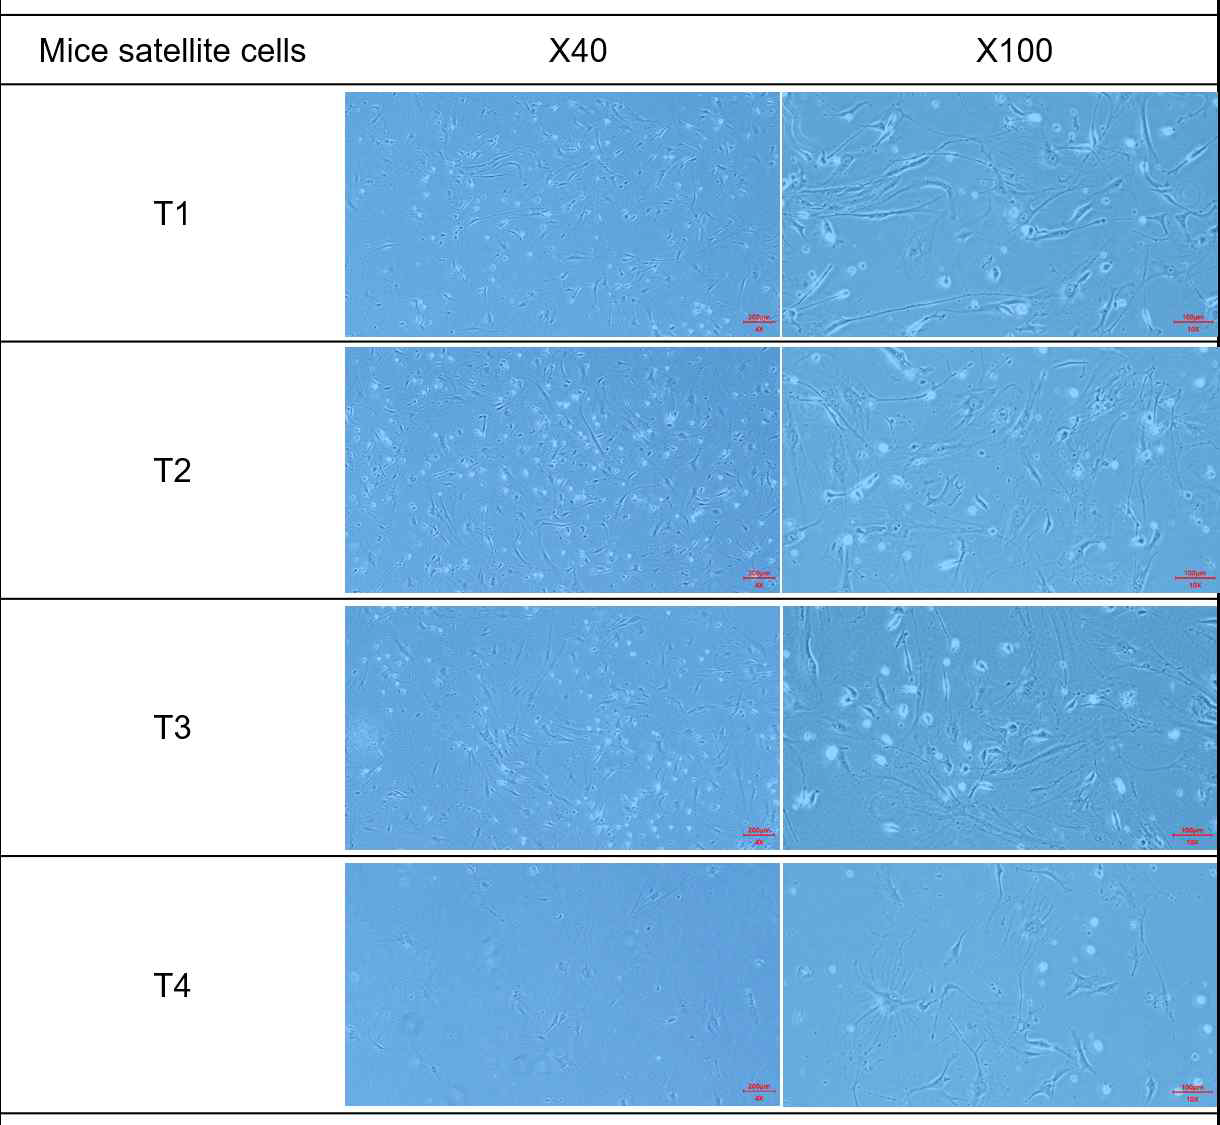 Proliferation of satellite cells obtained from mice muscle. T1, normal mice; T2, mice were treated with the gut microbiota (E.coli(1*108CFU/mL) and L.casei(1*104CFU/mL)); T3, mice were treated with dexamethasone (1mg/kg body weight); T4, elderly mice